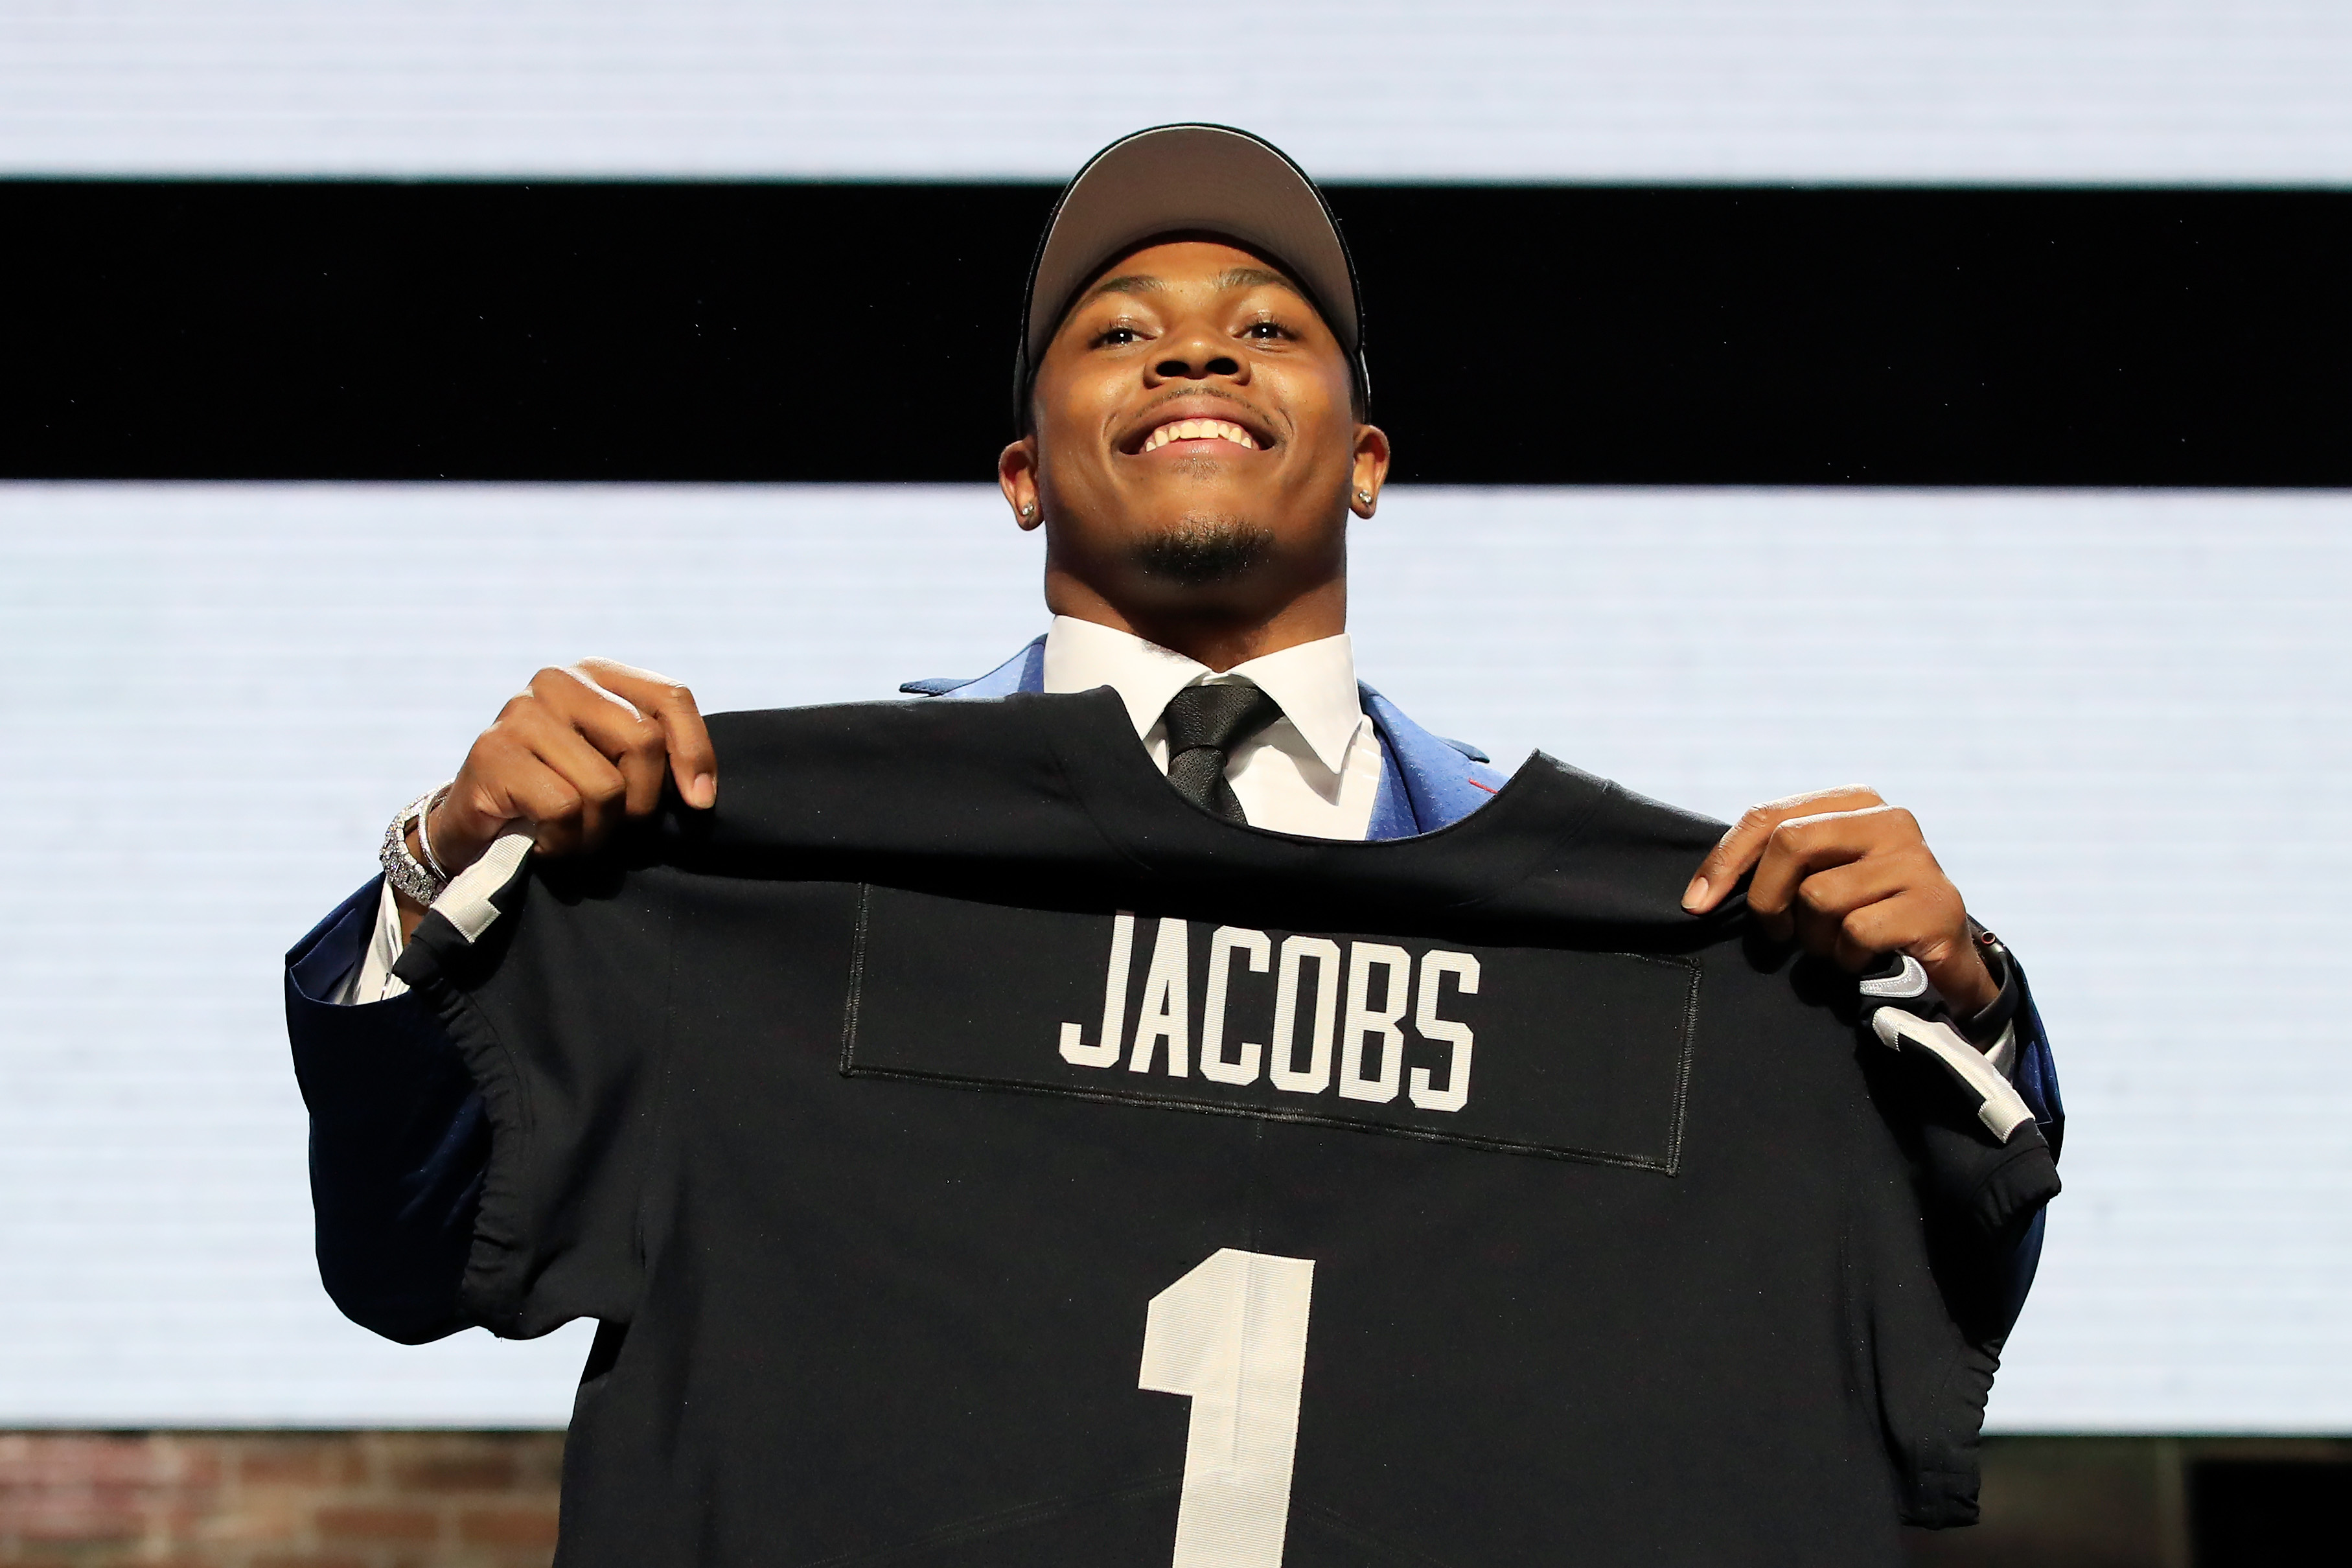 Josh Jacobs of Alabama reacts after being chosen #24 overall by the Oakland Raiders during the first round of the 2019 NFL Draft on April 25, 2019, in Nashville, Tennessee. | Source: Getty Images